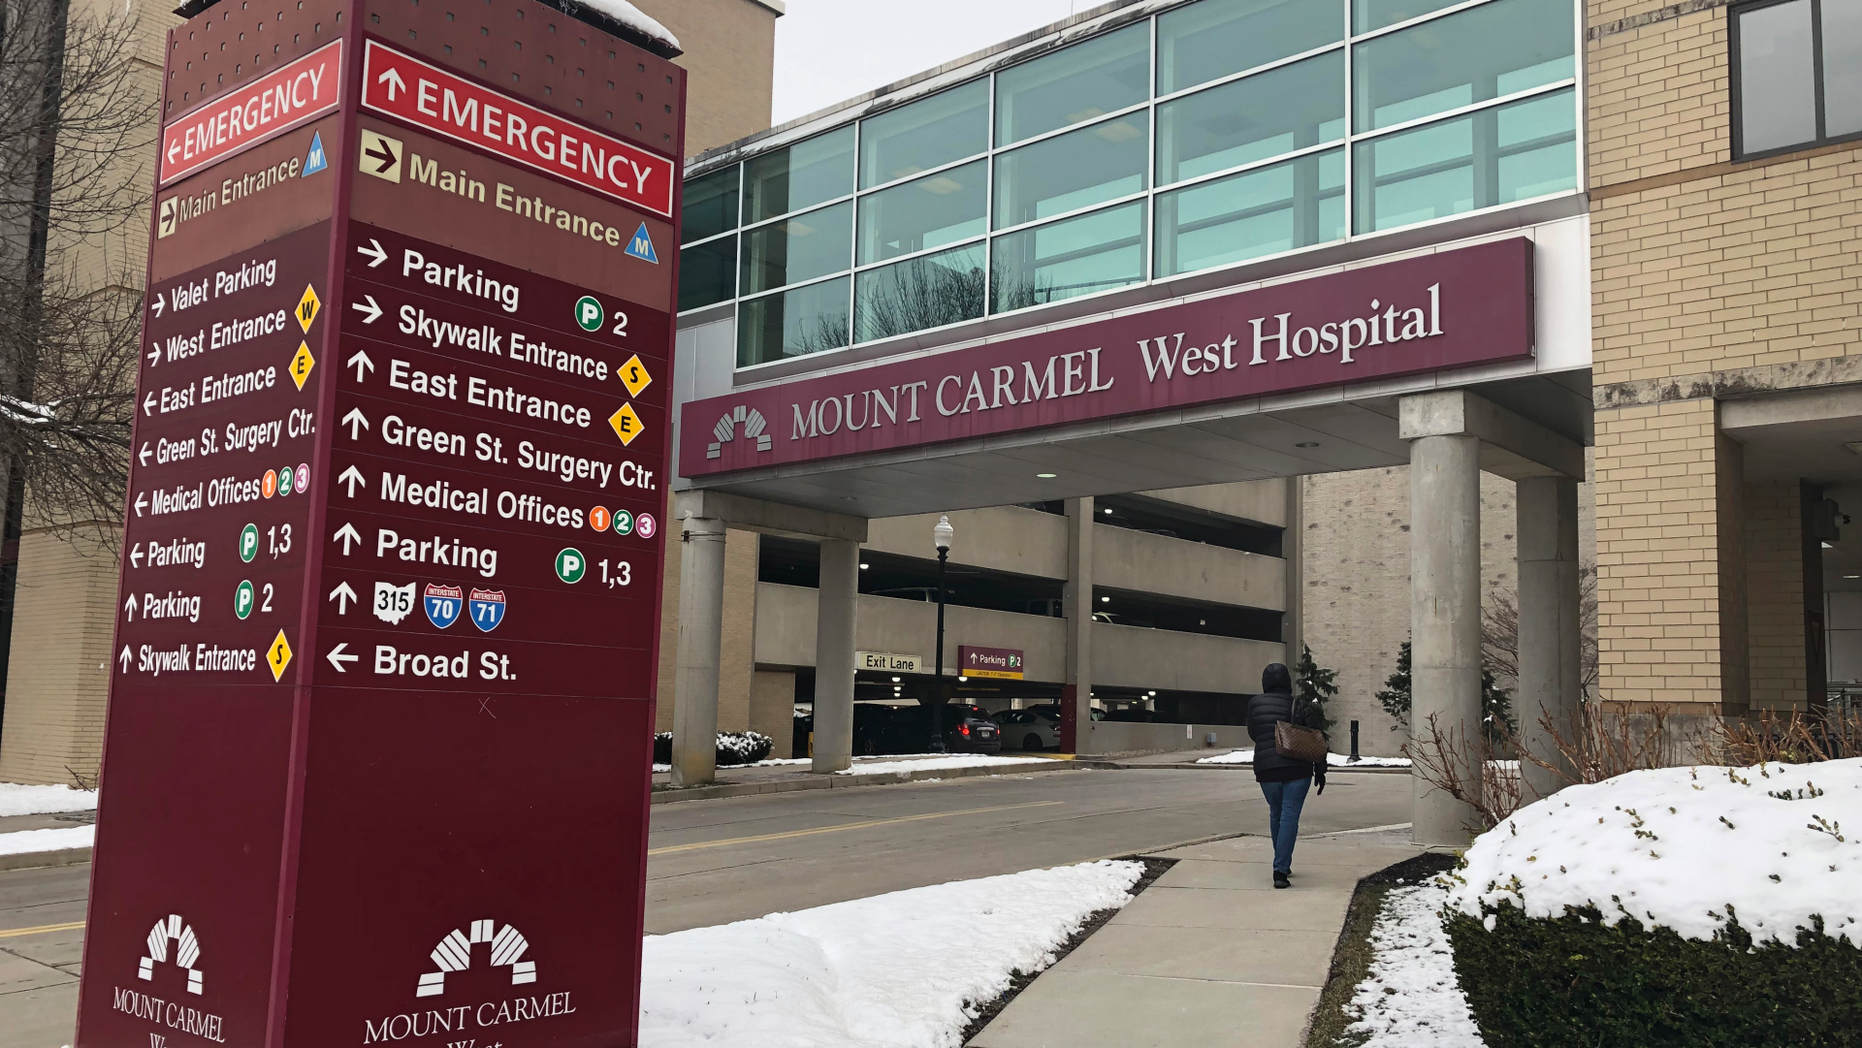 DOSSIER - In this archive photo from January 15, 2019, the main entrance of Mount Carmel West Hospital is shown in Columbus, Ohio. The Ohio hospital system has investigated a doctor accused of prescribing overdoses of painkillers to dozens of patients, which means that five people may have been given excessive doses so that it was still possible to improve their treatment conditions. Mount Carmel Health System, located in the Columbus area, announced Friday, Feb. 22 that it was notifying the families of these patients. (AP Photo / Andrew Welsh Huggins, File)